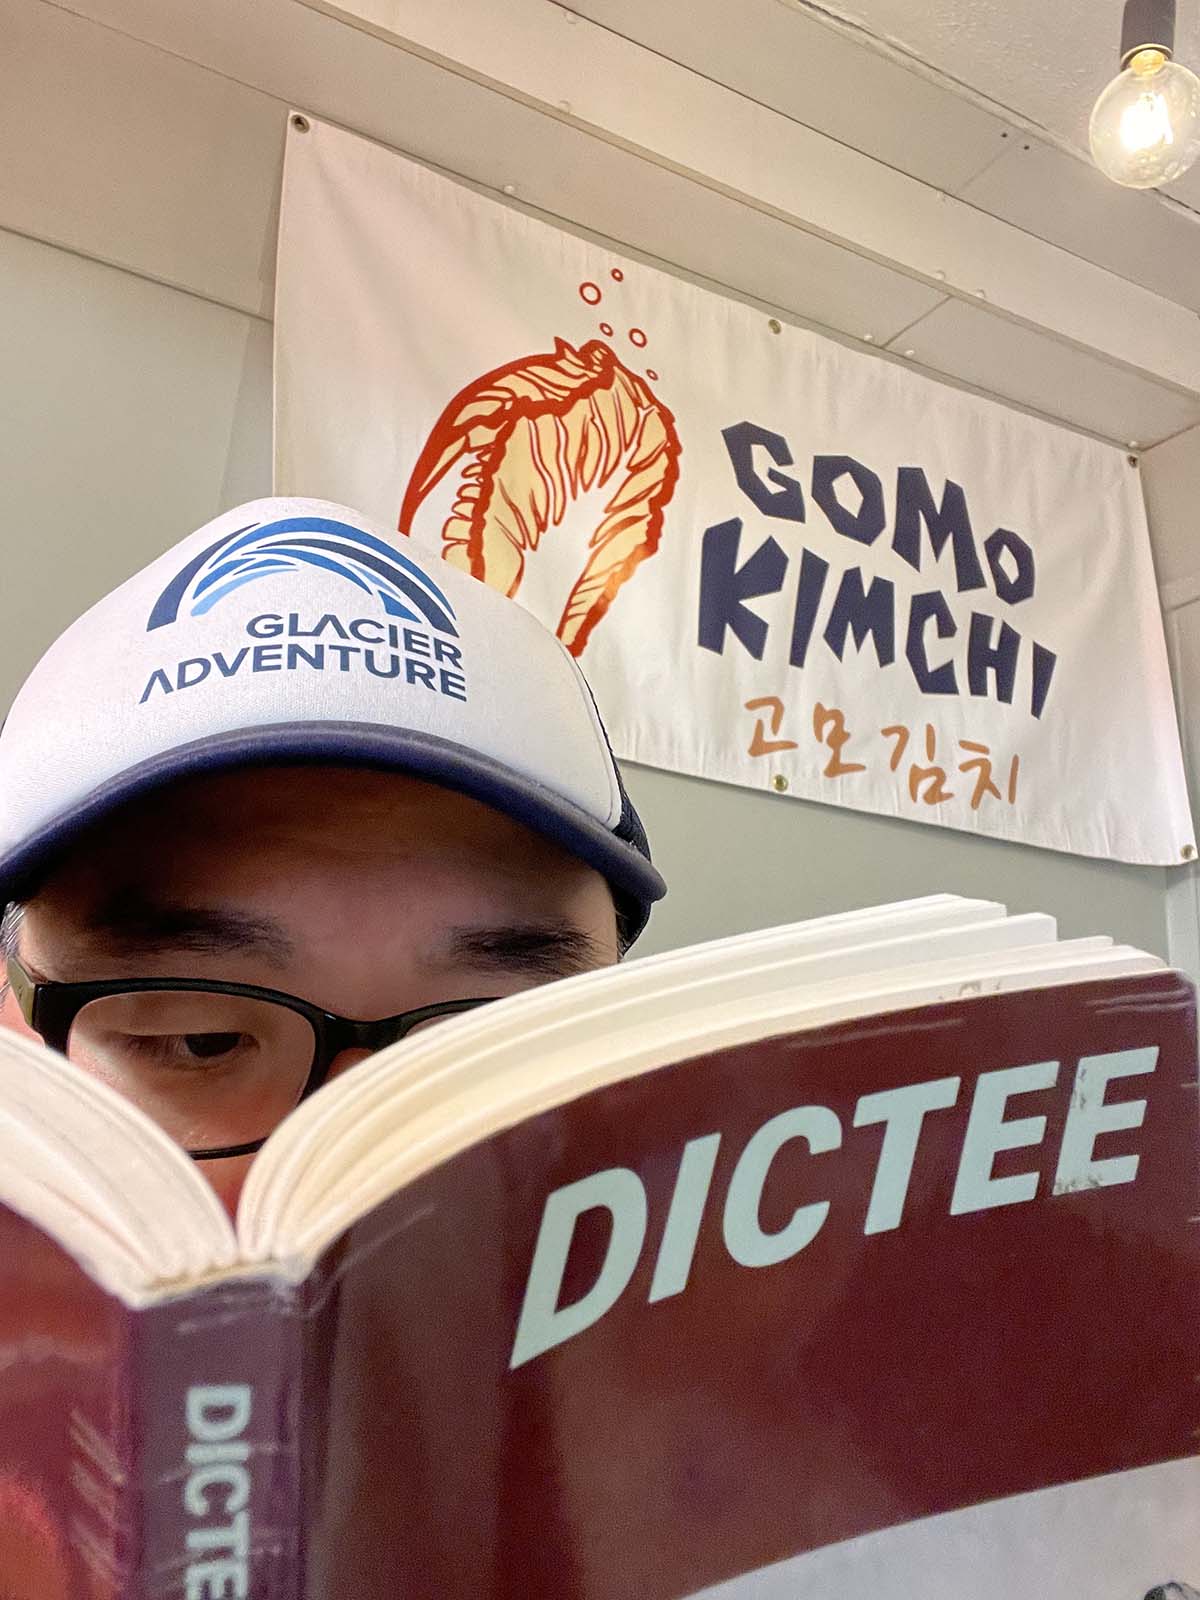 a man wearing a baseball cap and glasses reads a book, underneath a banner that says 'Gomo Kimchi'